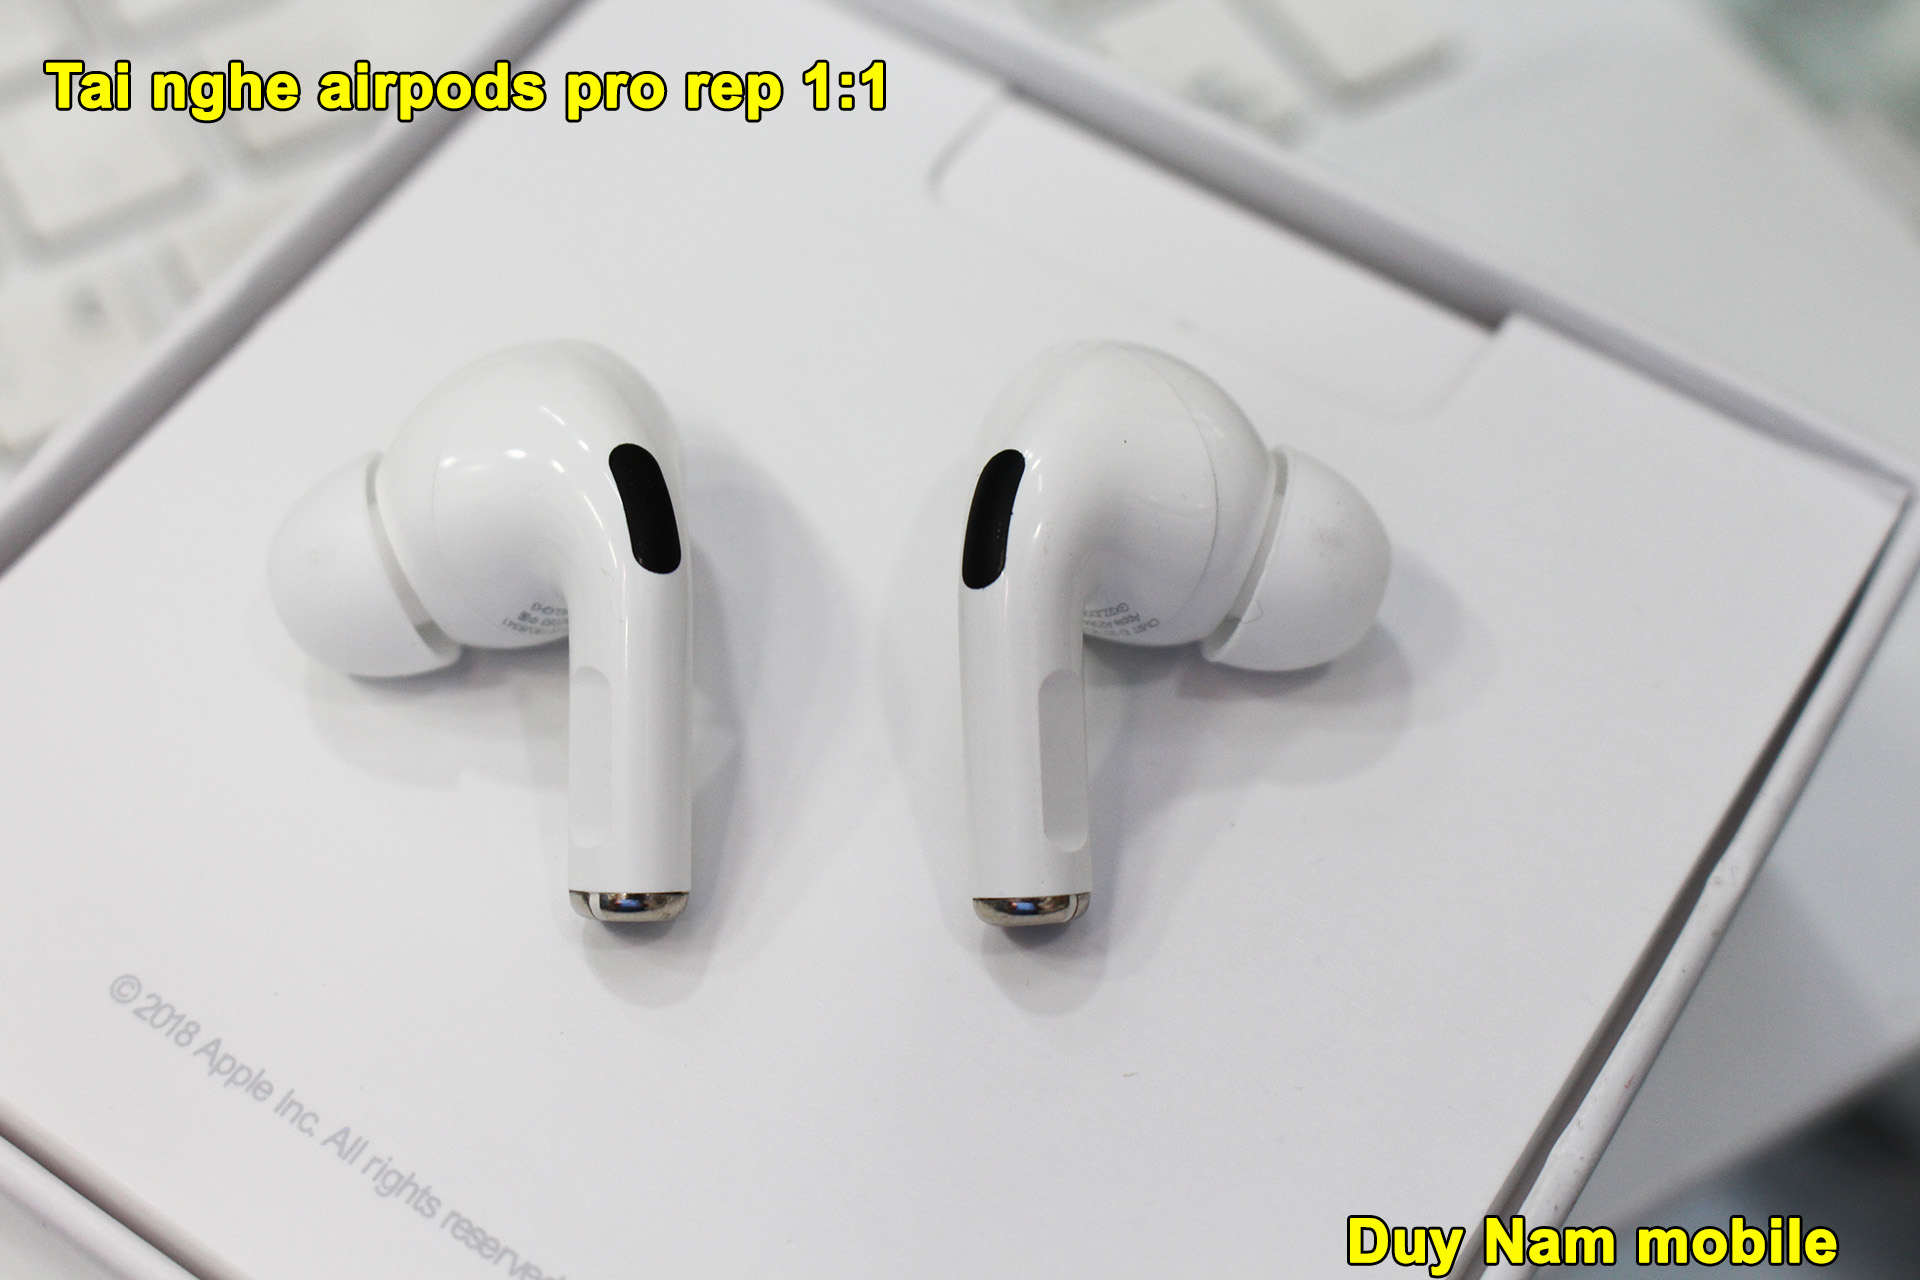 Tai nghe airpods pro rep 1:1